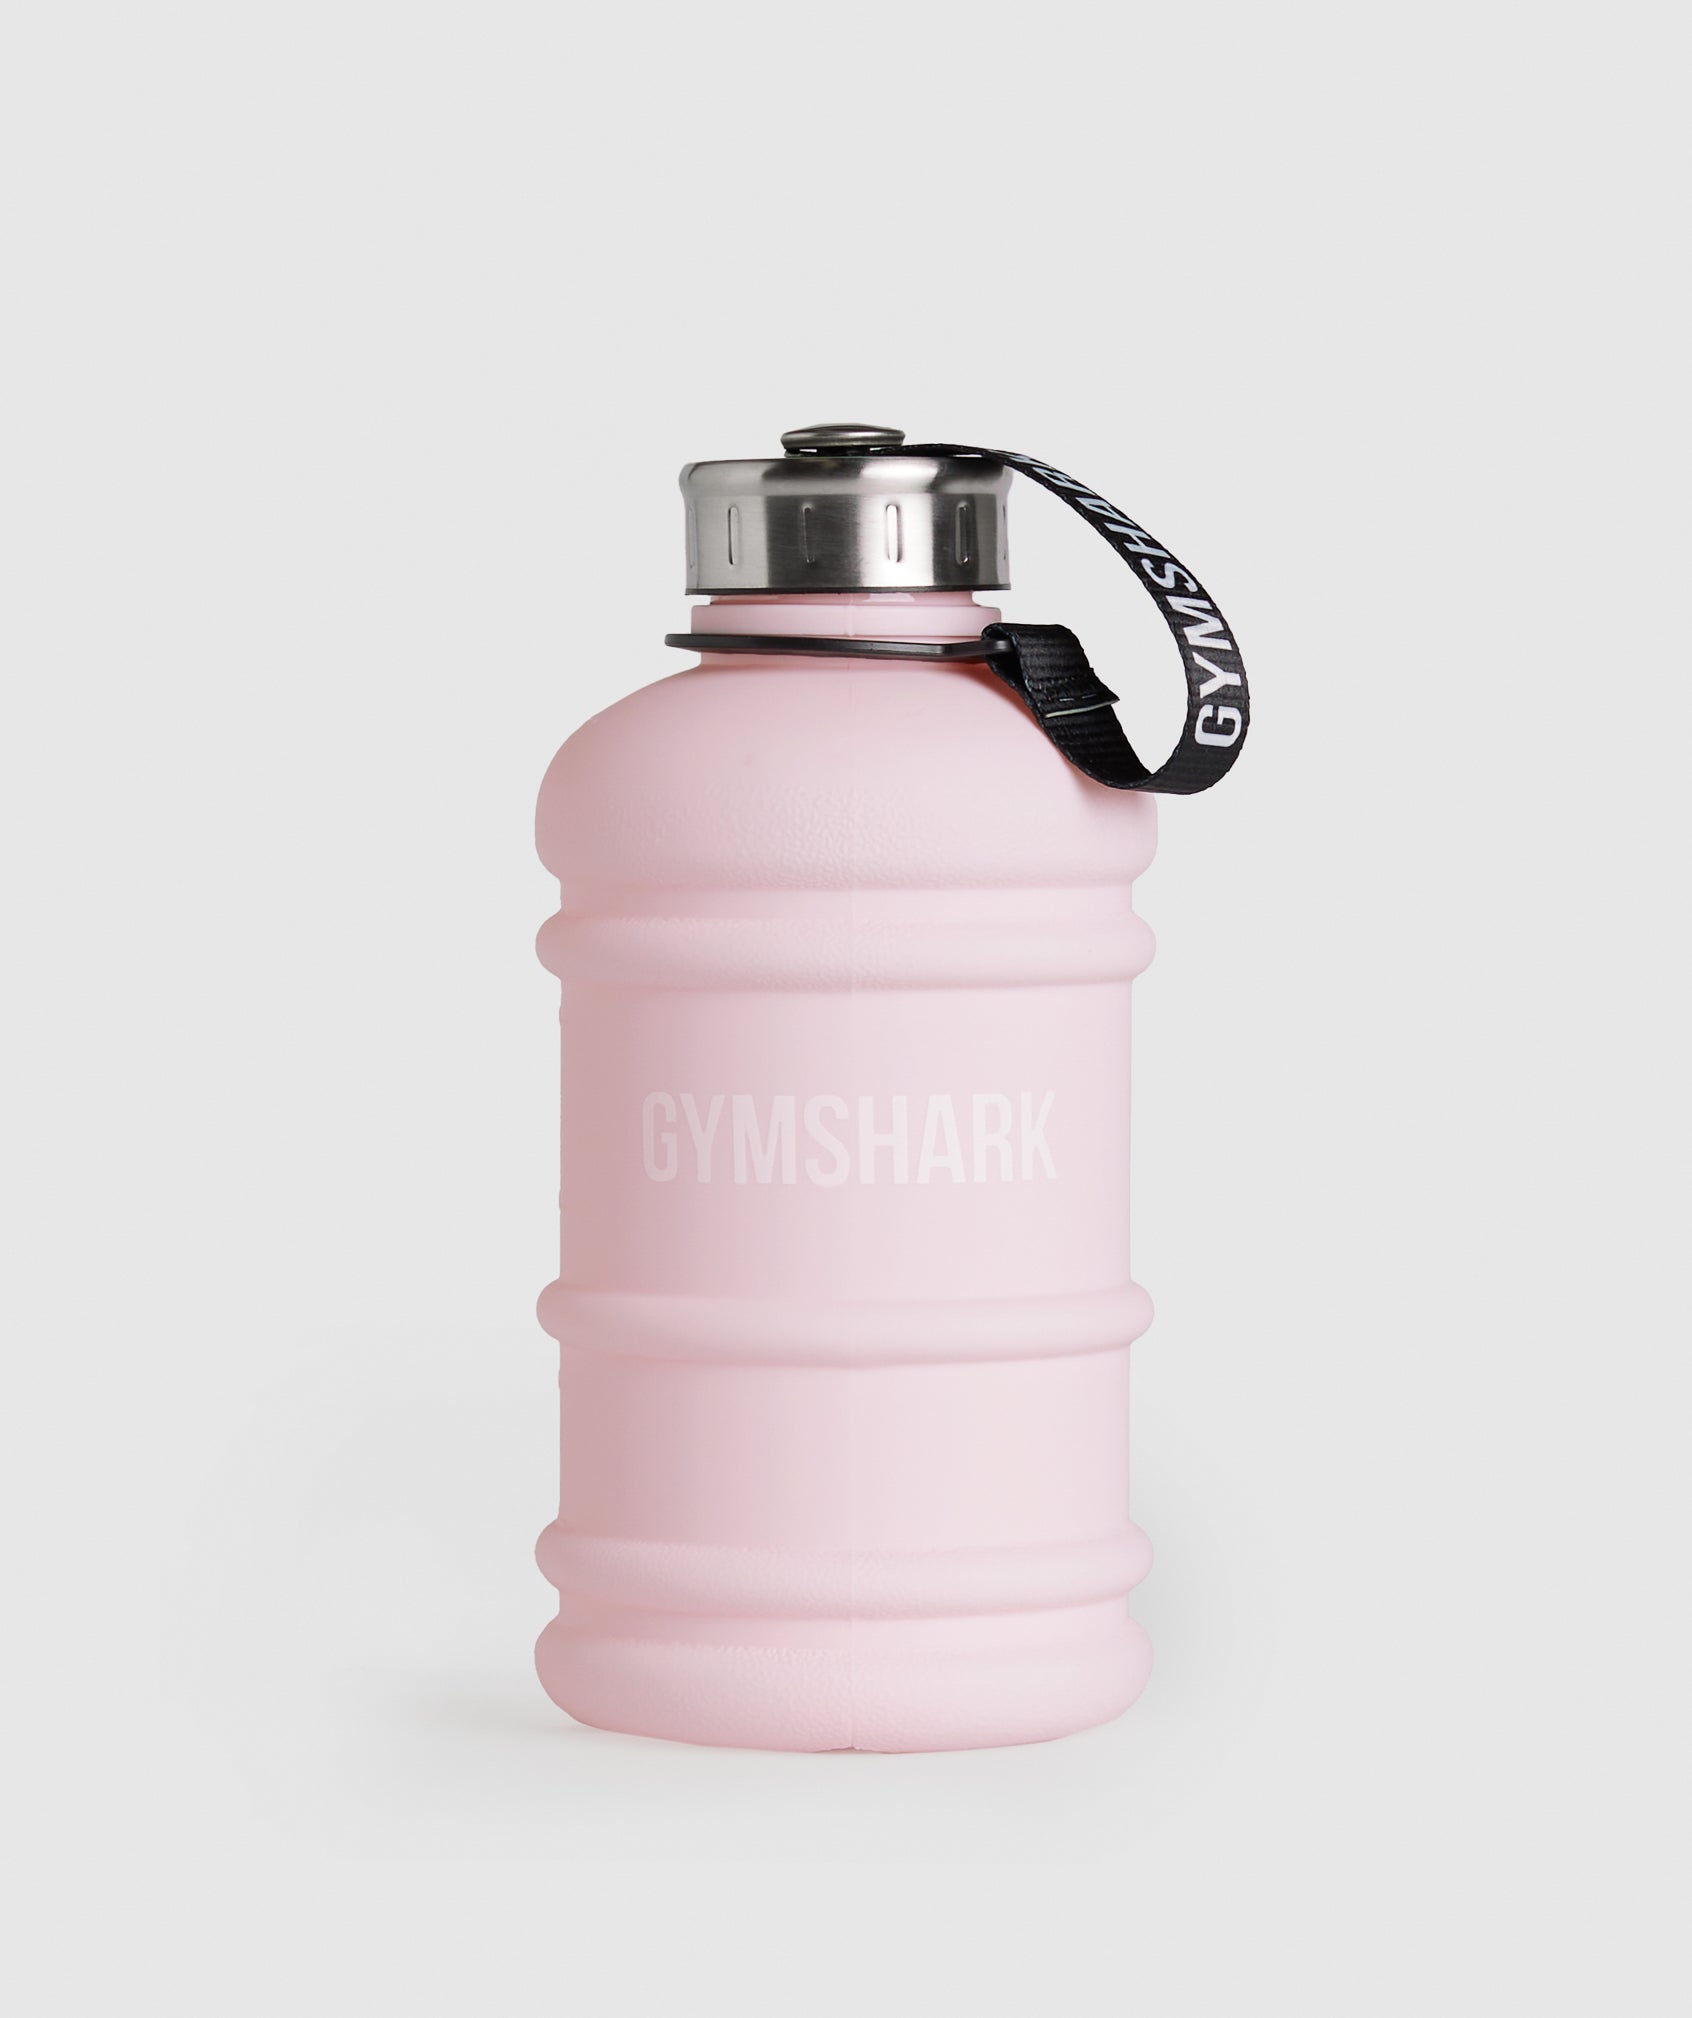 33oz Water Bottle in Dolly Pink is out of stock